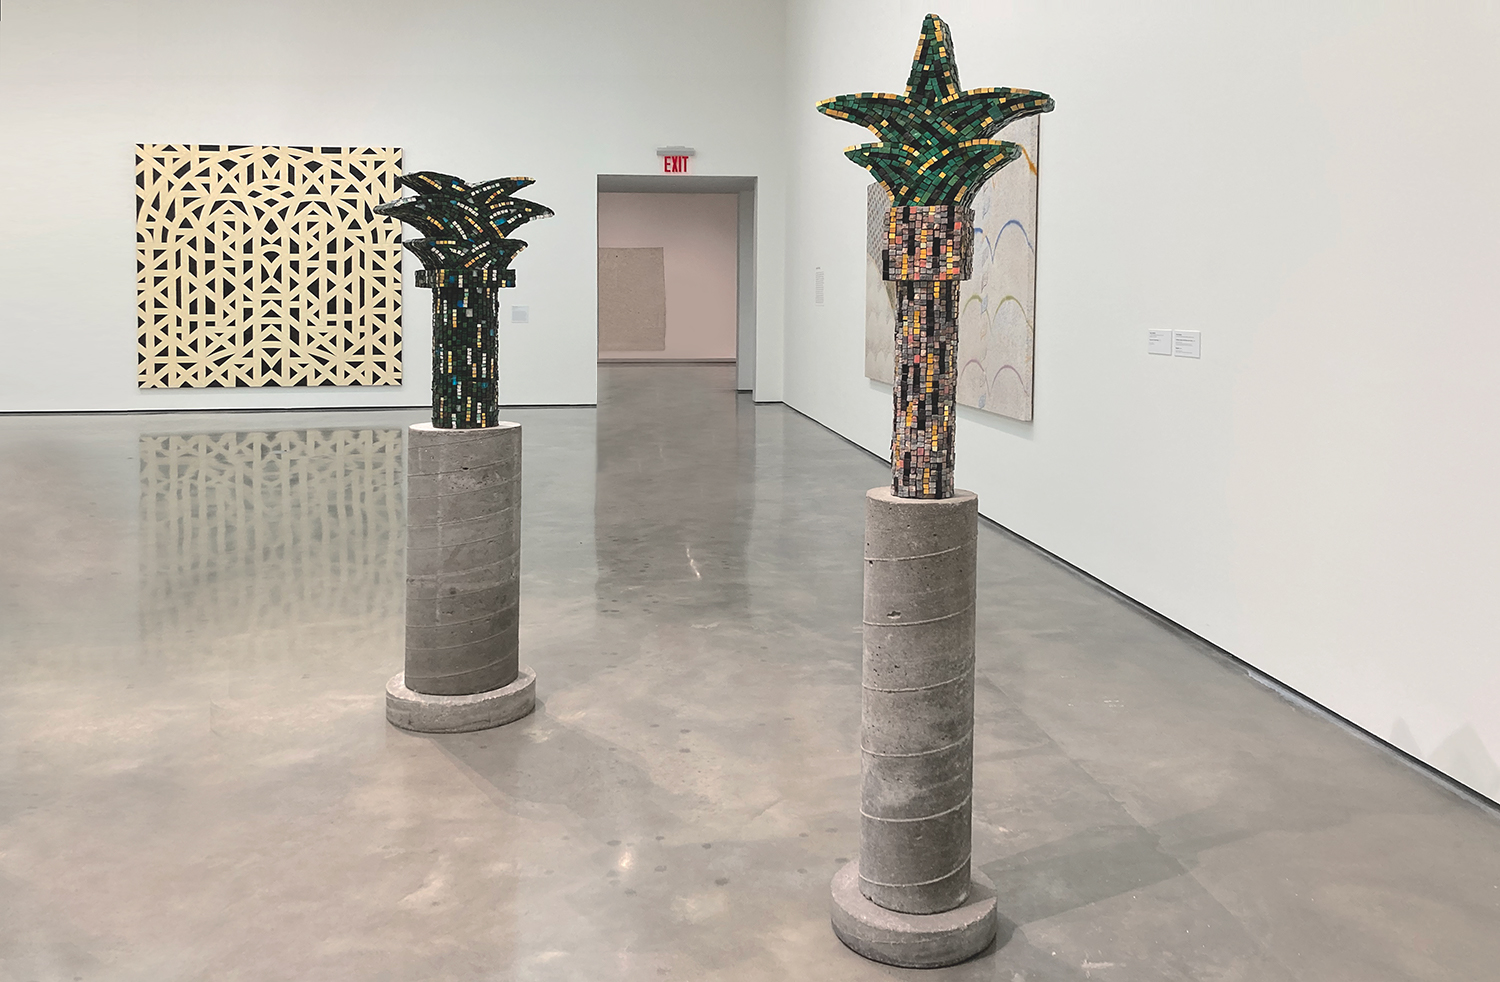 <strong>With Pleasure: Pattern and Decoration in American Art 1972–1985</strong>  
                   June 26 – November 28, 2021<br>  
                <h6>Hessel Museum of Art</h6>
                